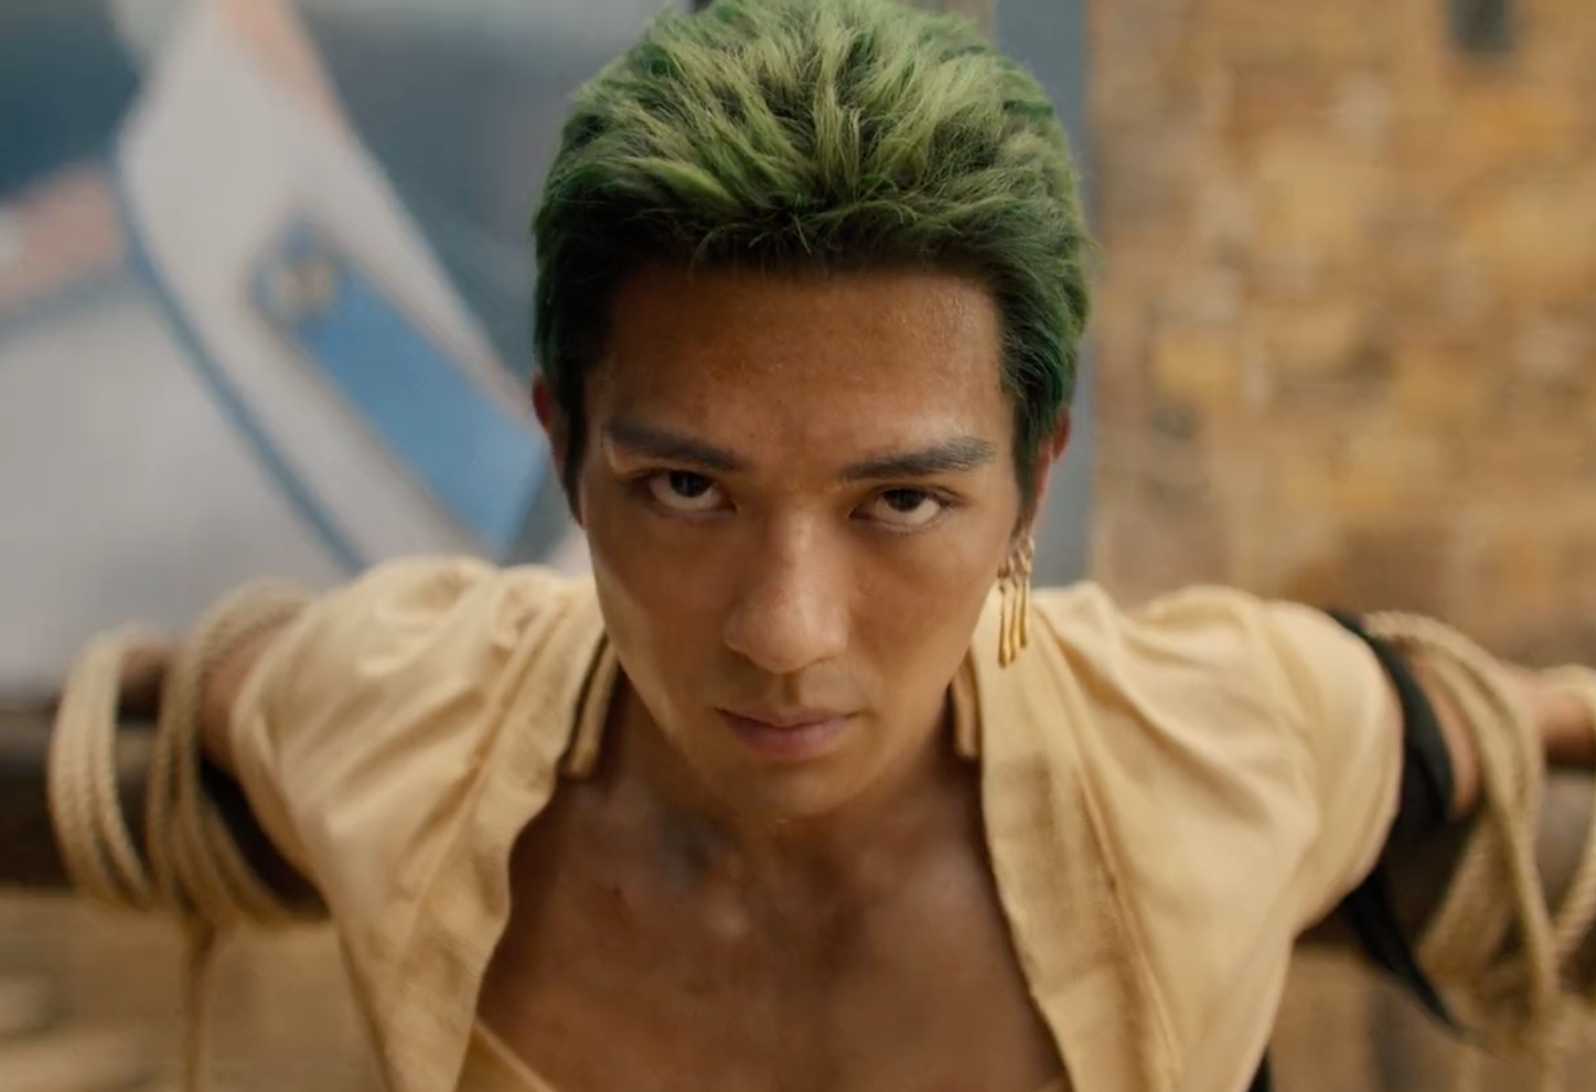 Who Is Zoro’s Live-Action Actor?